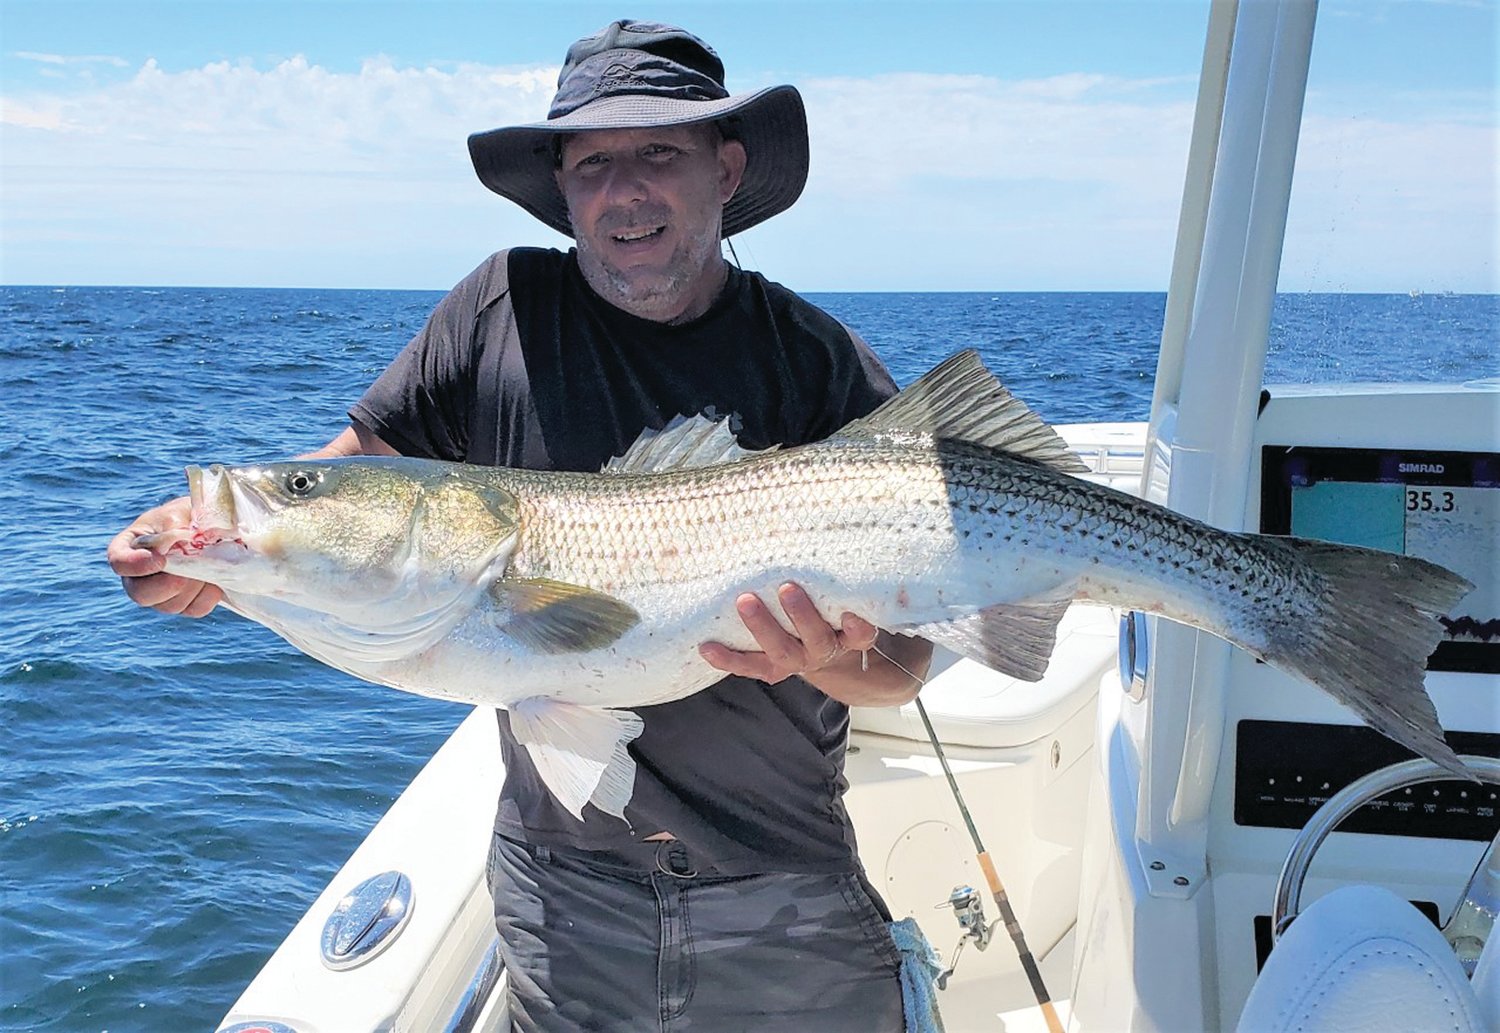 CATCH AND RELEASE: Tom Peters of Warwick with a striped bass he caught at Block Island’s Southwest Ledge when fishing with his brother Allan Peters (also of Warwick). (Submitted photos)